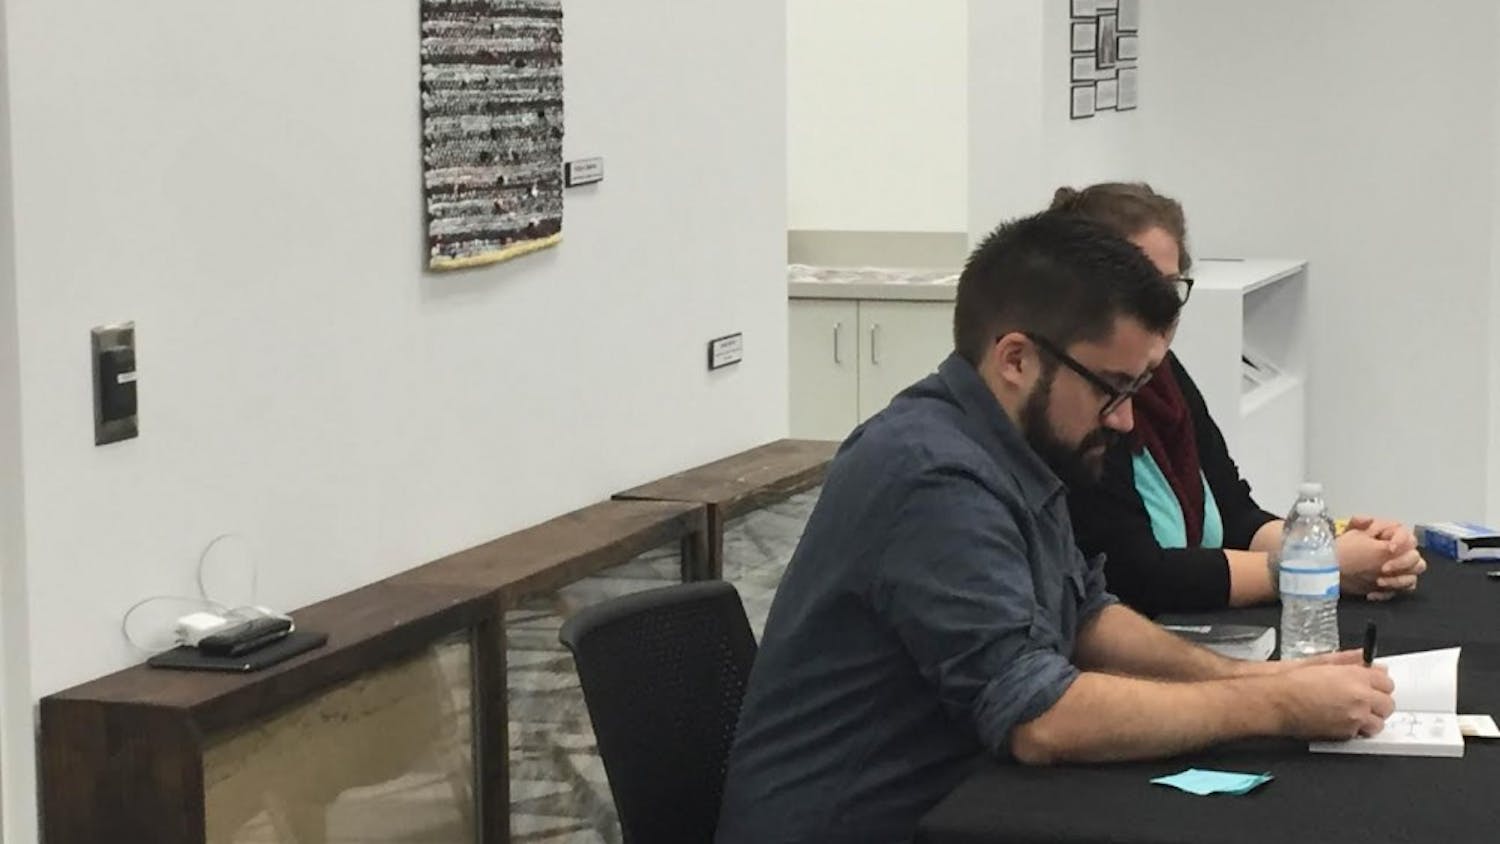 Austin Kleon was at the Richland County Public Main Library discussing his ideas for creativity and freedom of ideas.